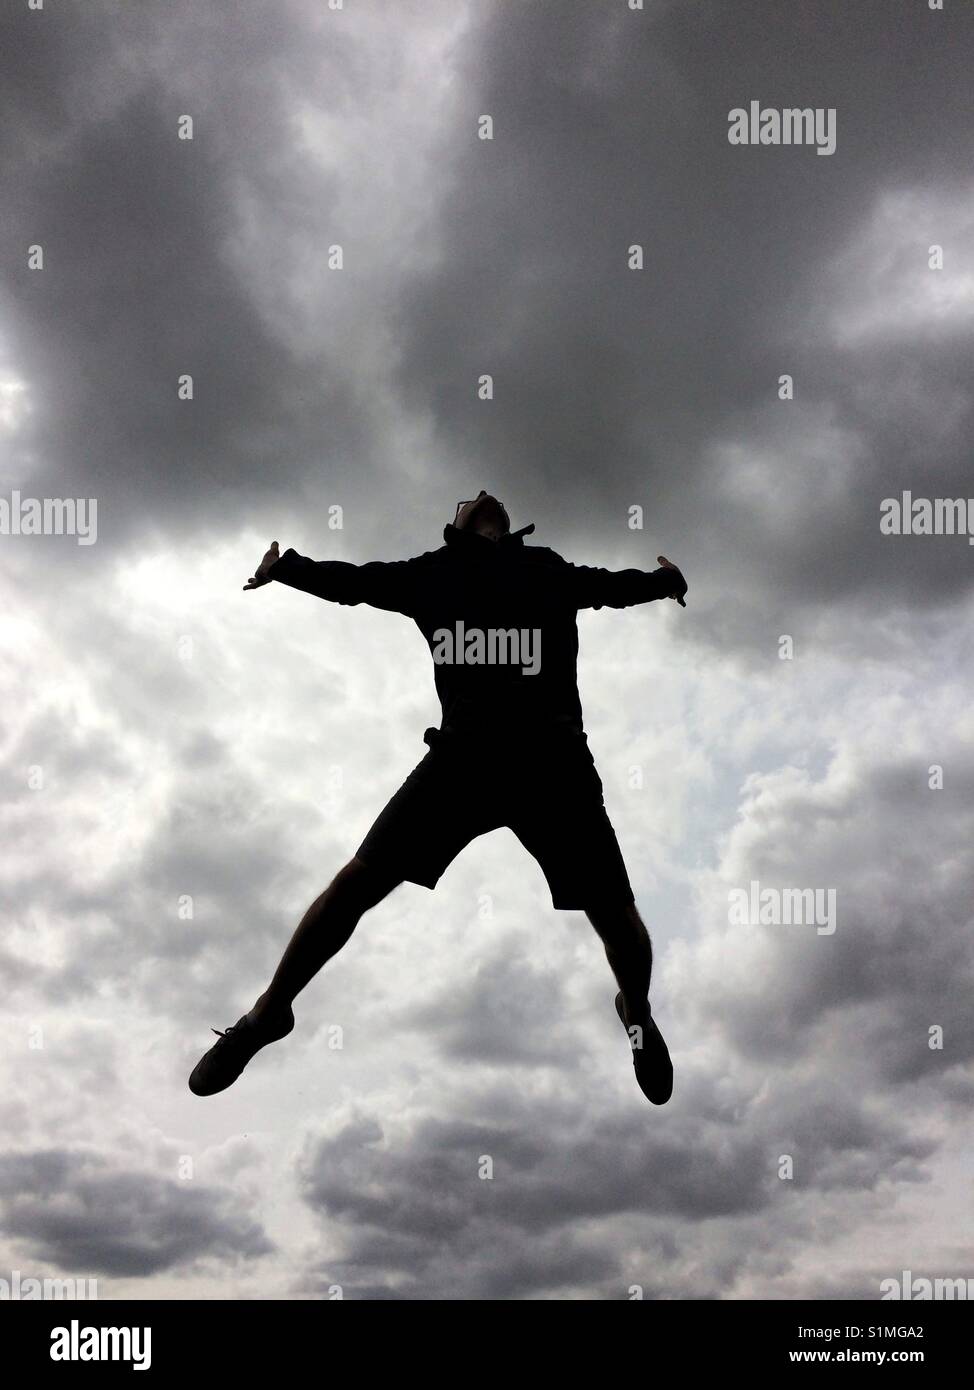 The silhouette of a man jumping or leaping high in the sky for joy and freedom with a dramatic sky behind Stock Photo